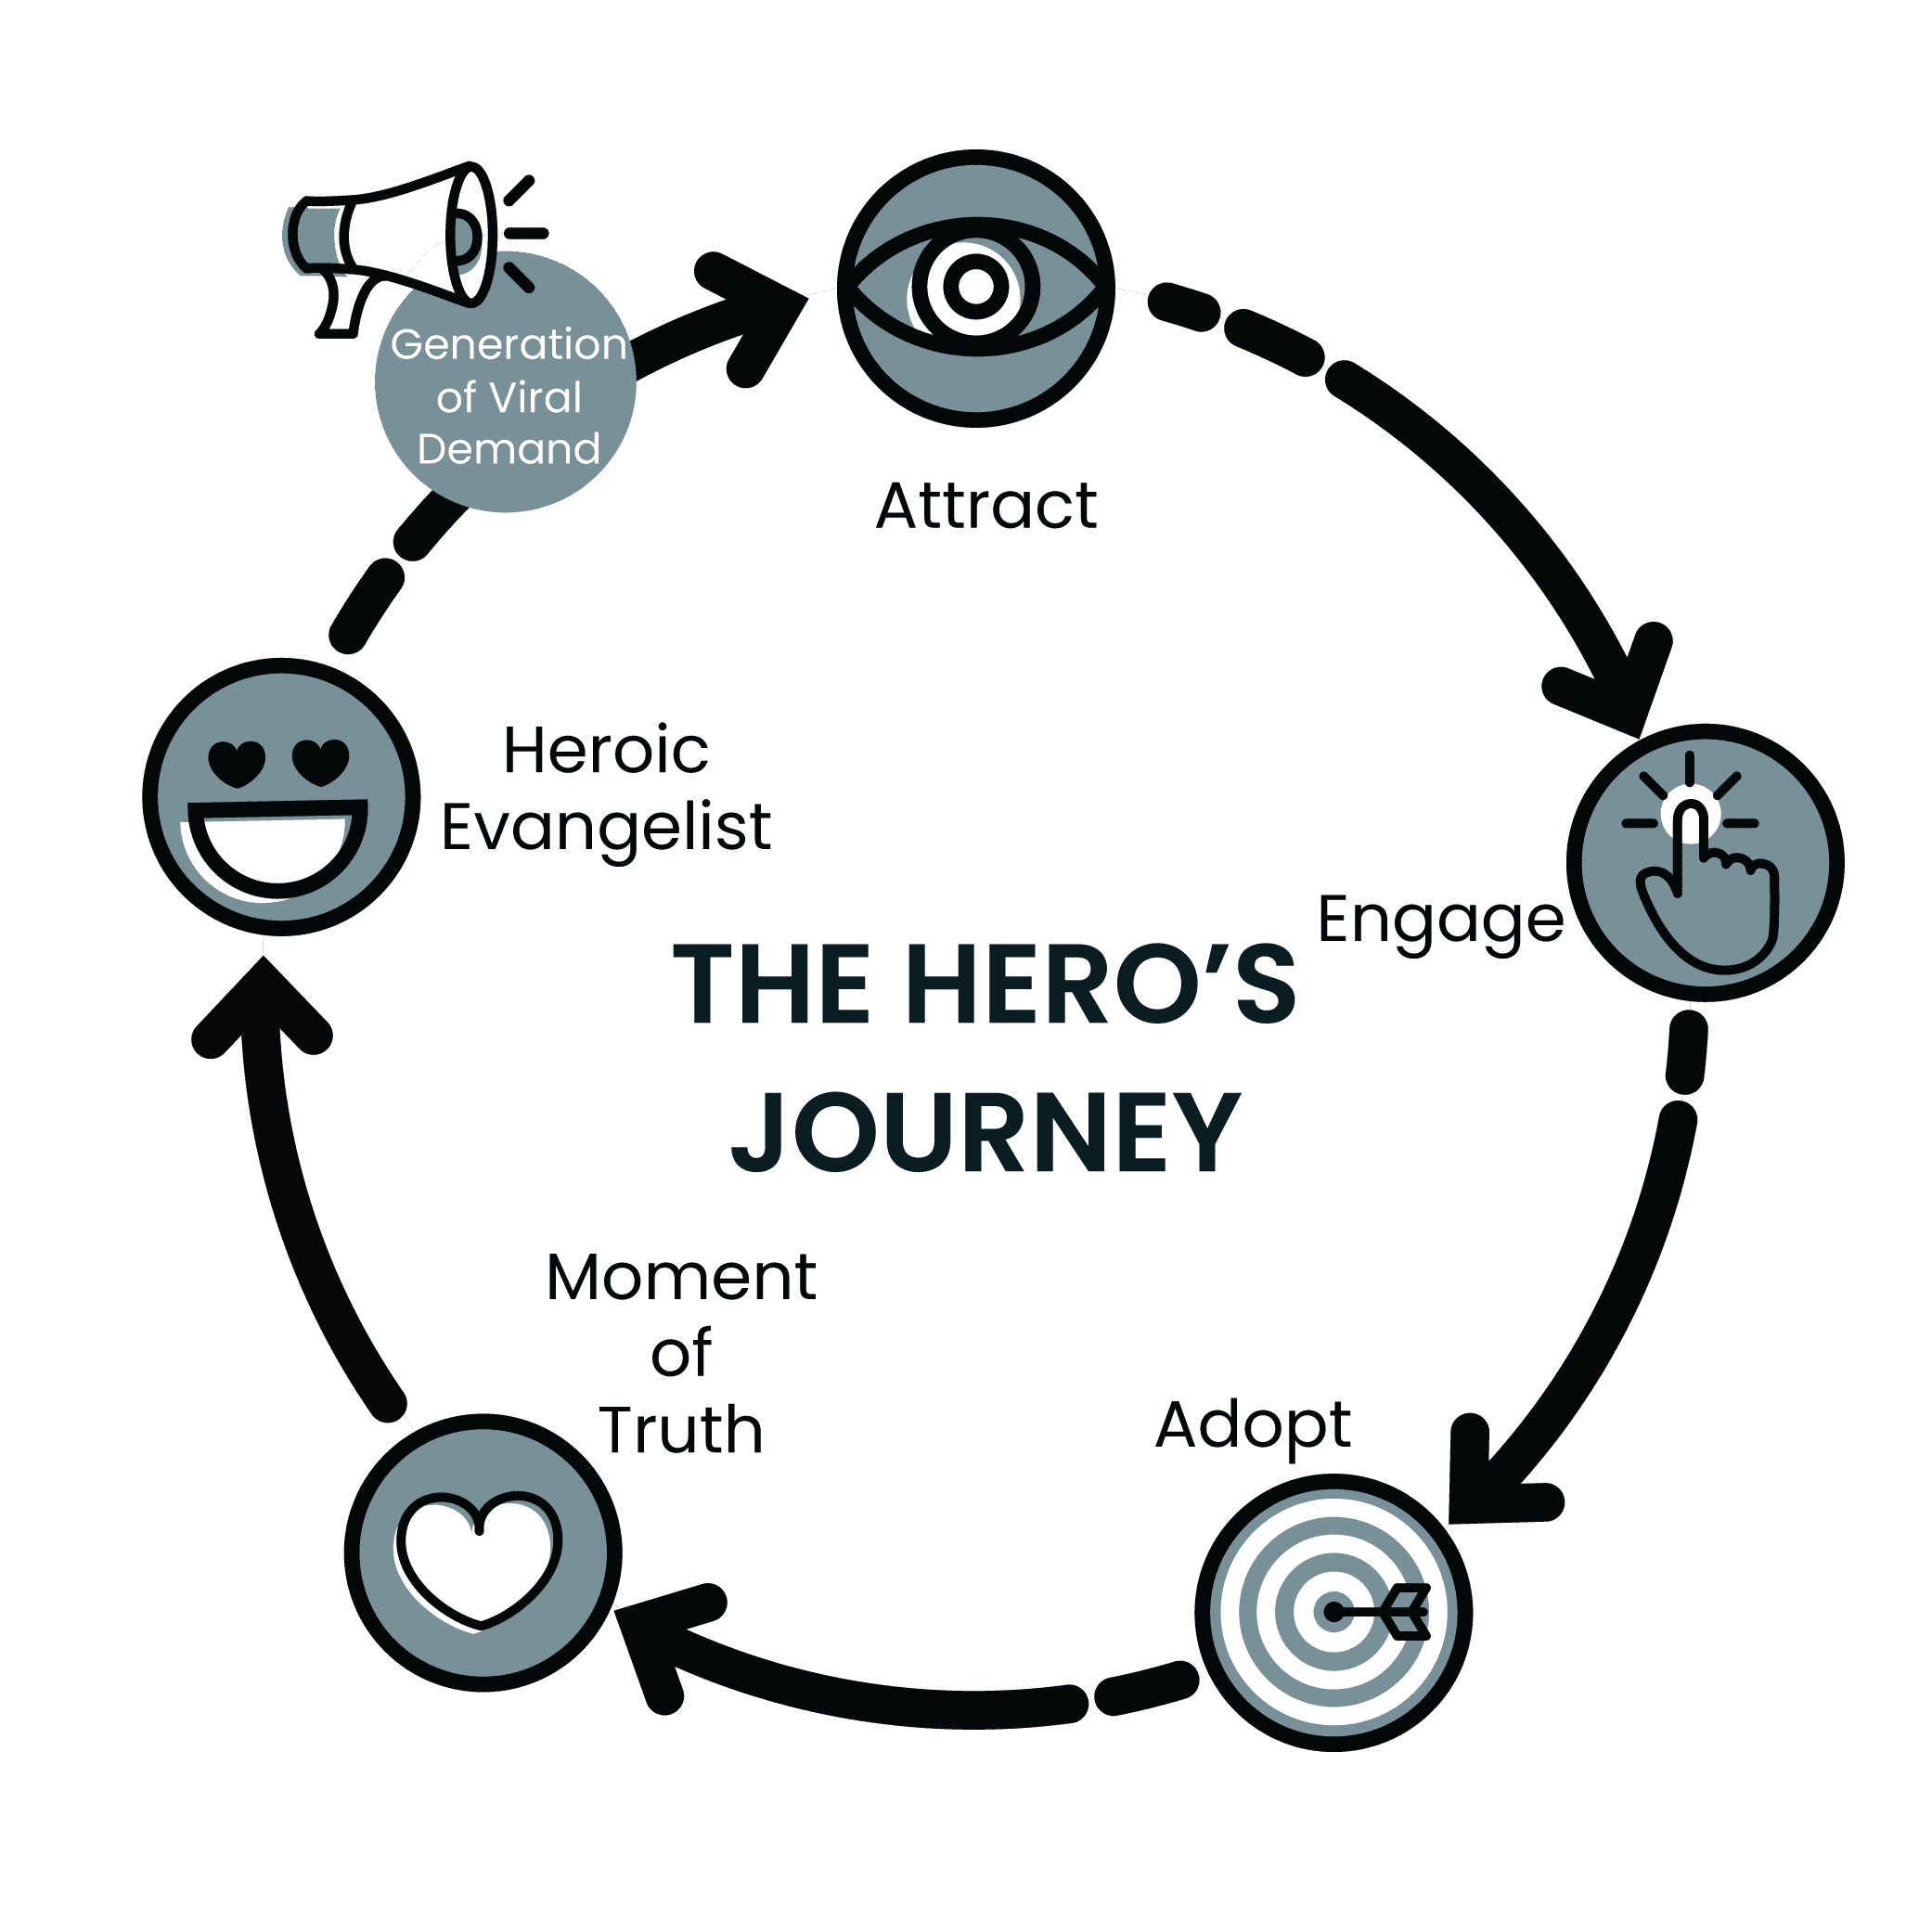 A circular diagram titled 'The Hero's Journey', featuring steps: Attract, Engage, Adopt, Moment of Truth, Heroic Evangelist, and Generation of Viral Demand.